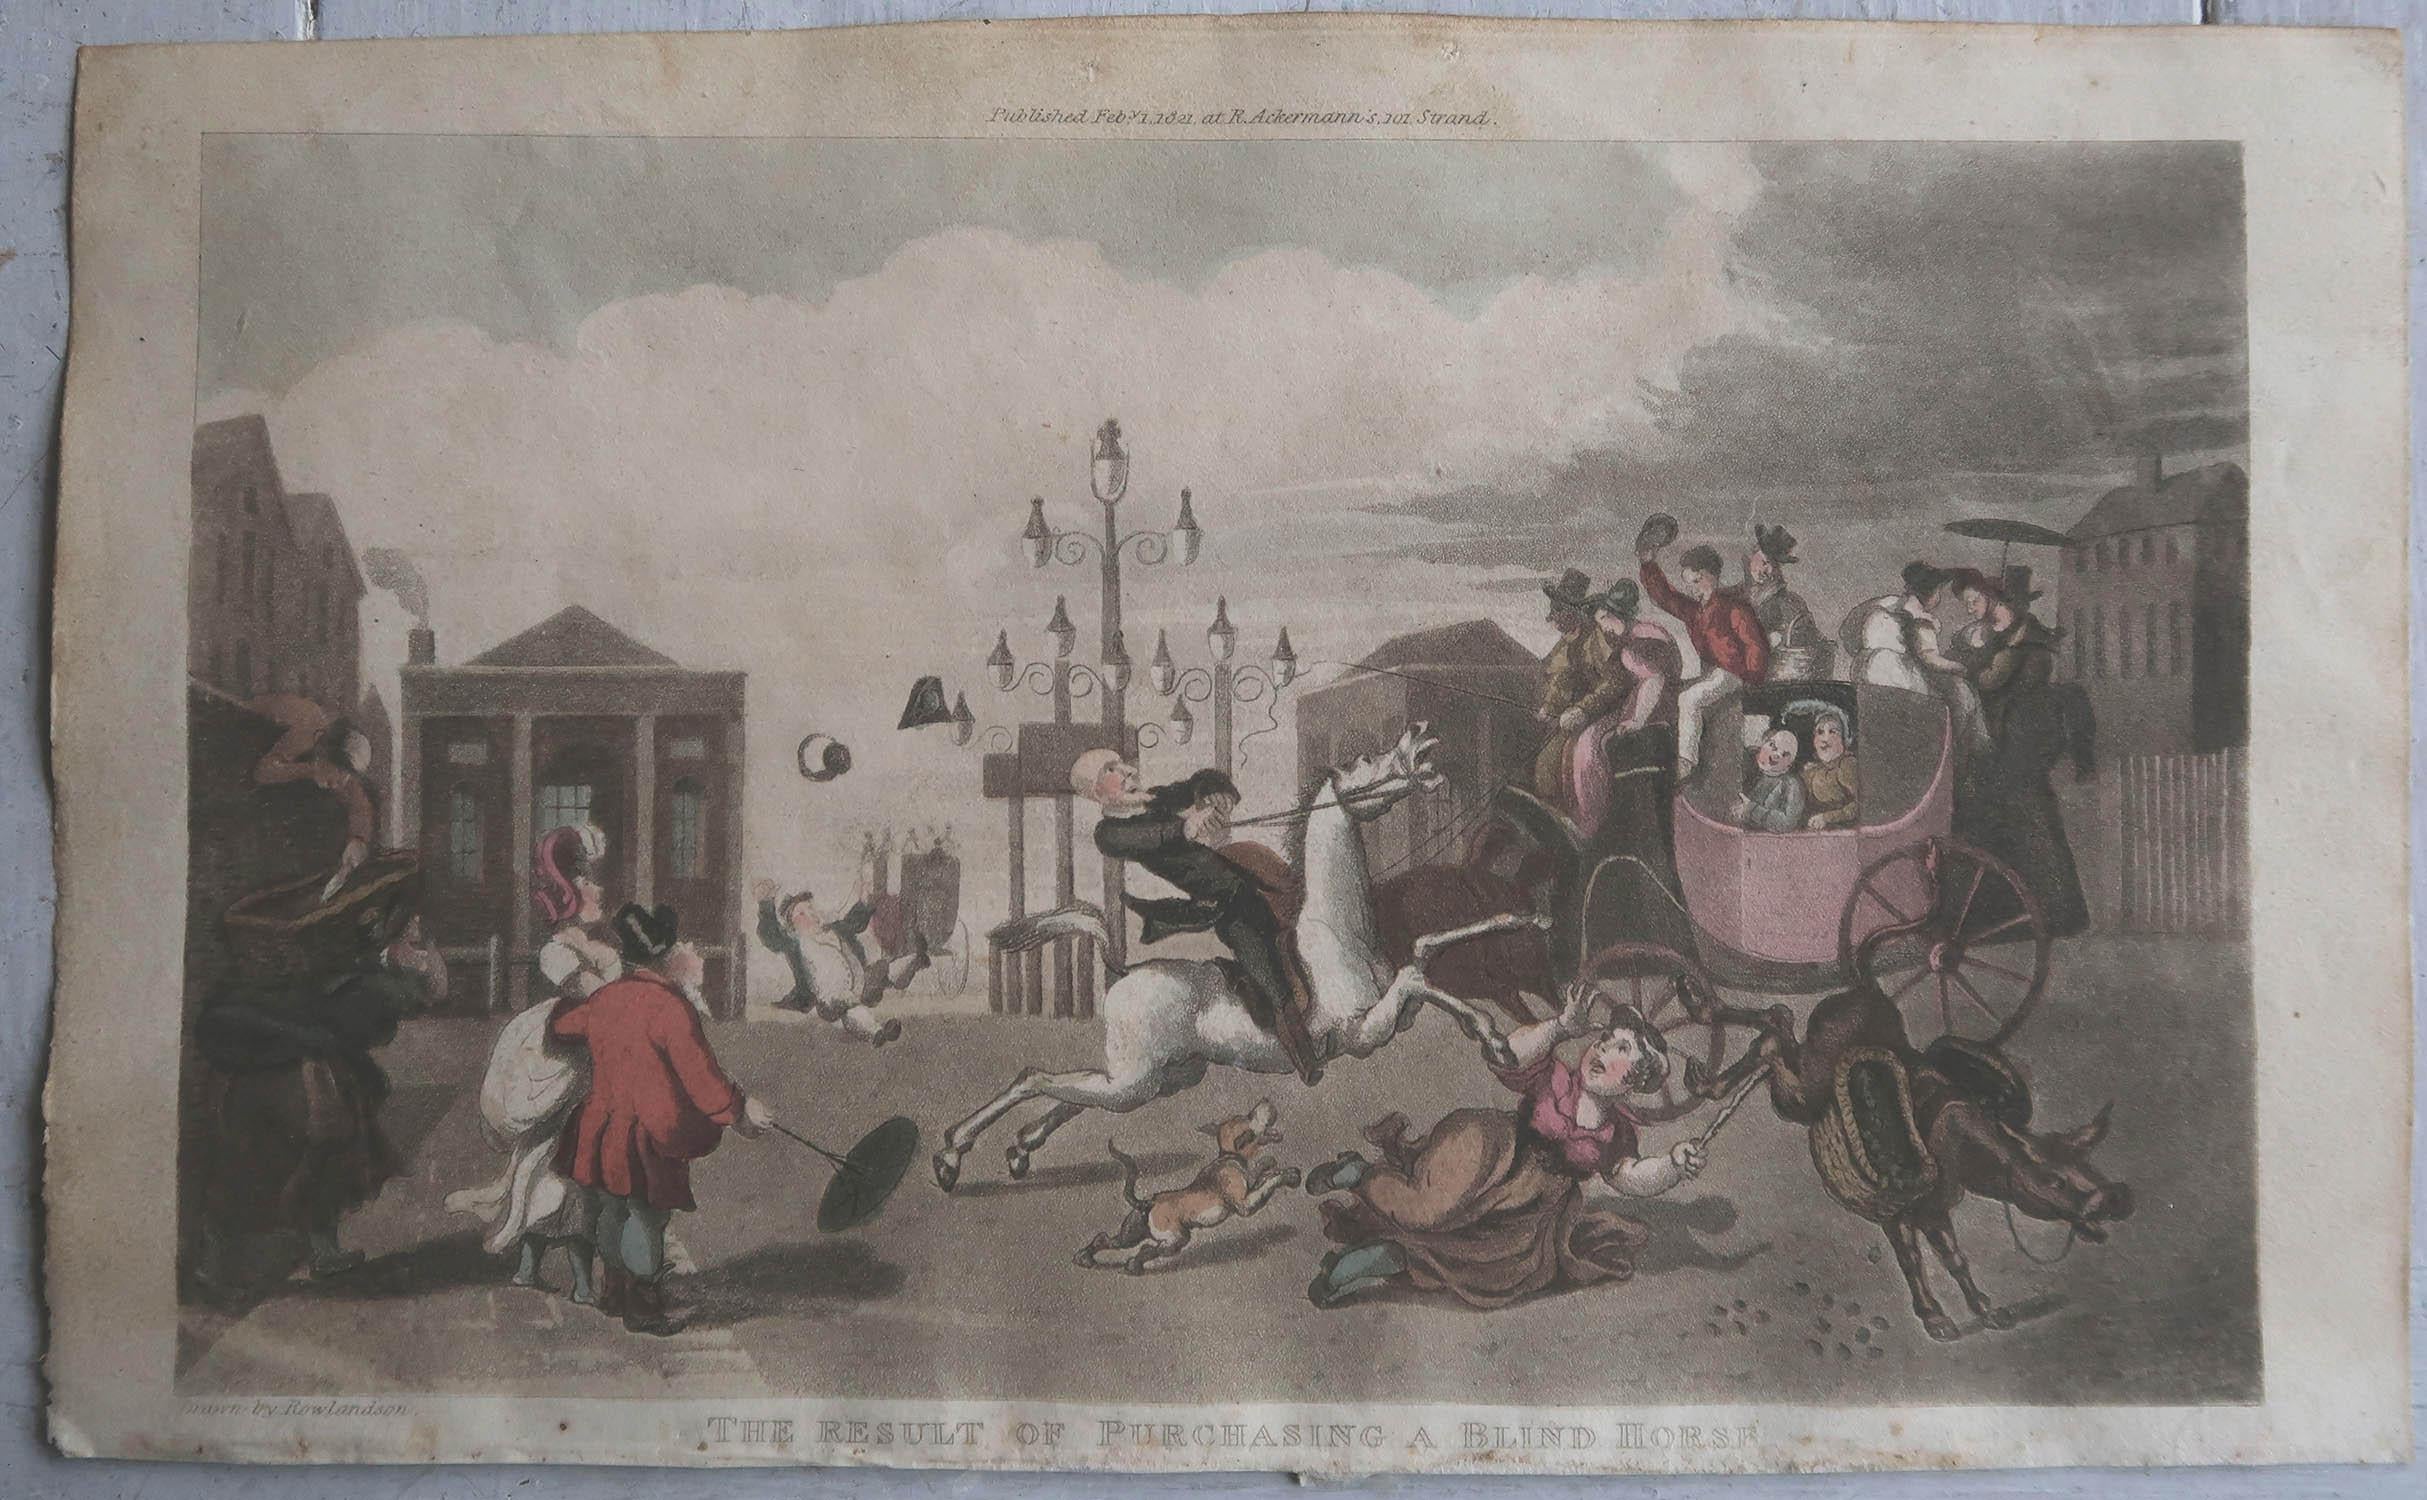 English Original Antique Print After Thomas Rowlandson, Purchasing a Blind Horse, 1821 For Sale